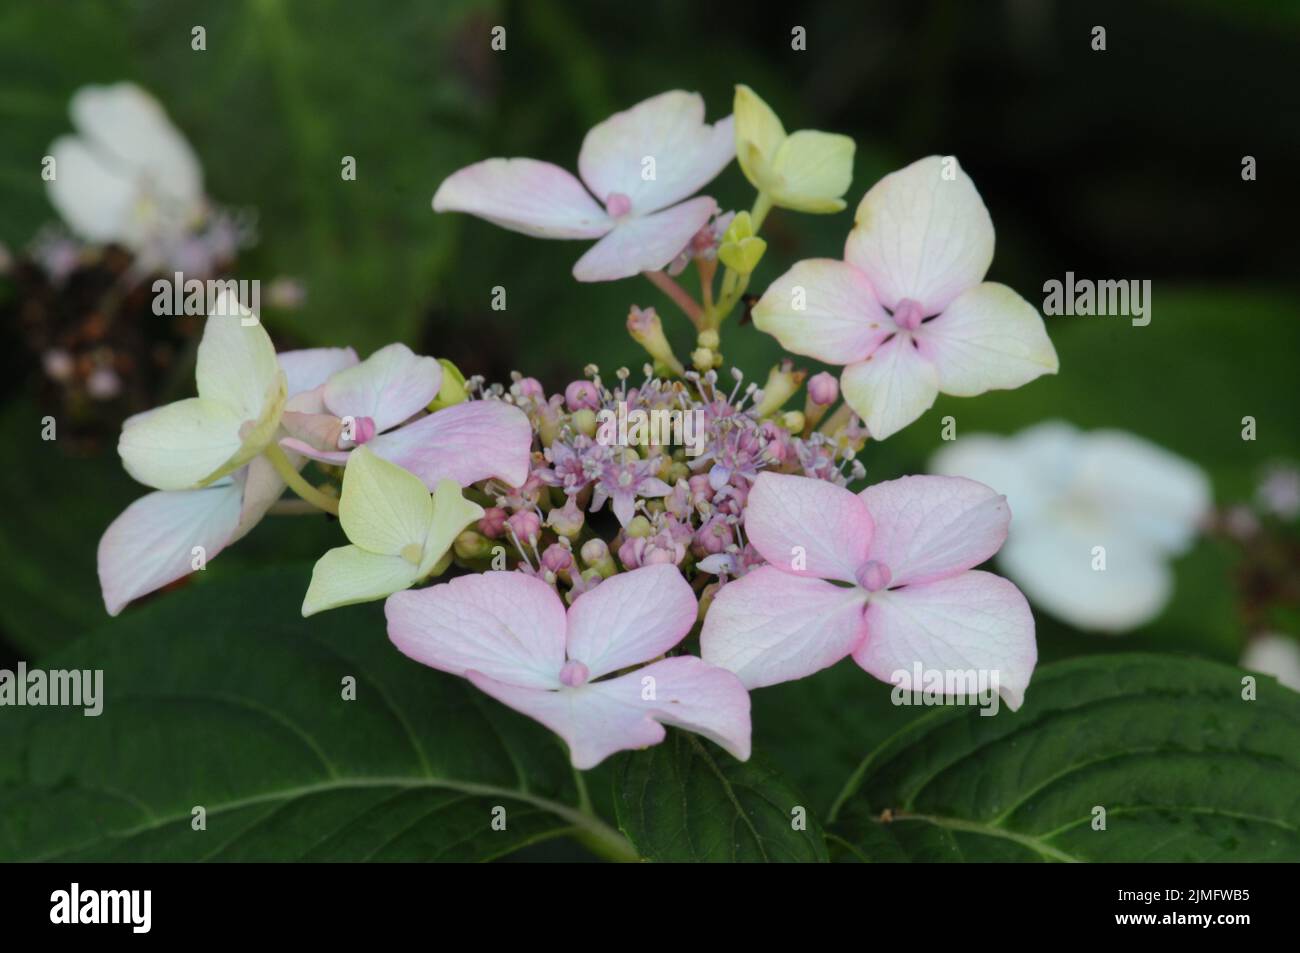 Hydrangea Macrophilla White Wave. Flattened lacecap flower heads in white blue and pink colour. Stock Photo